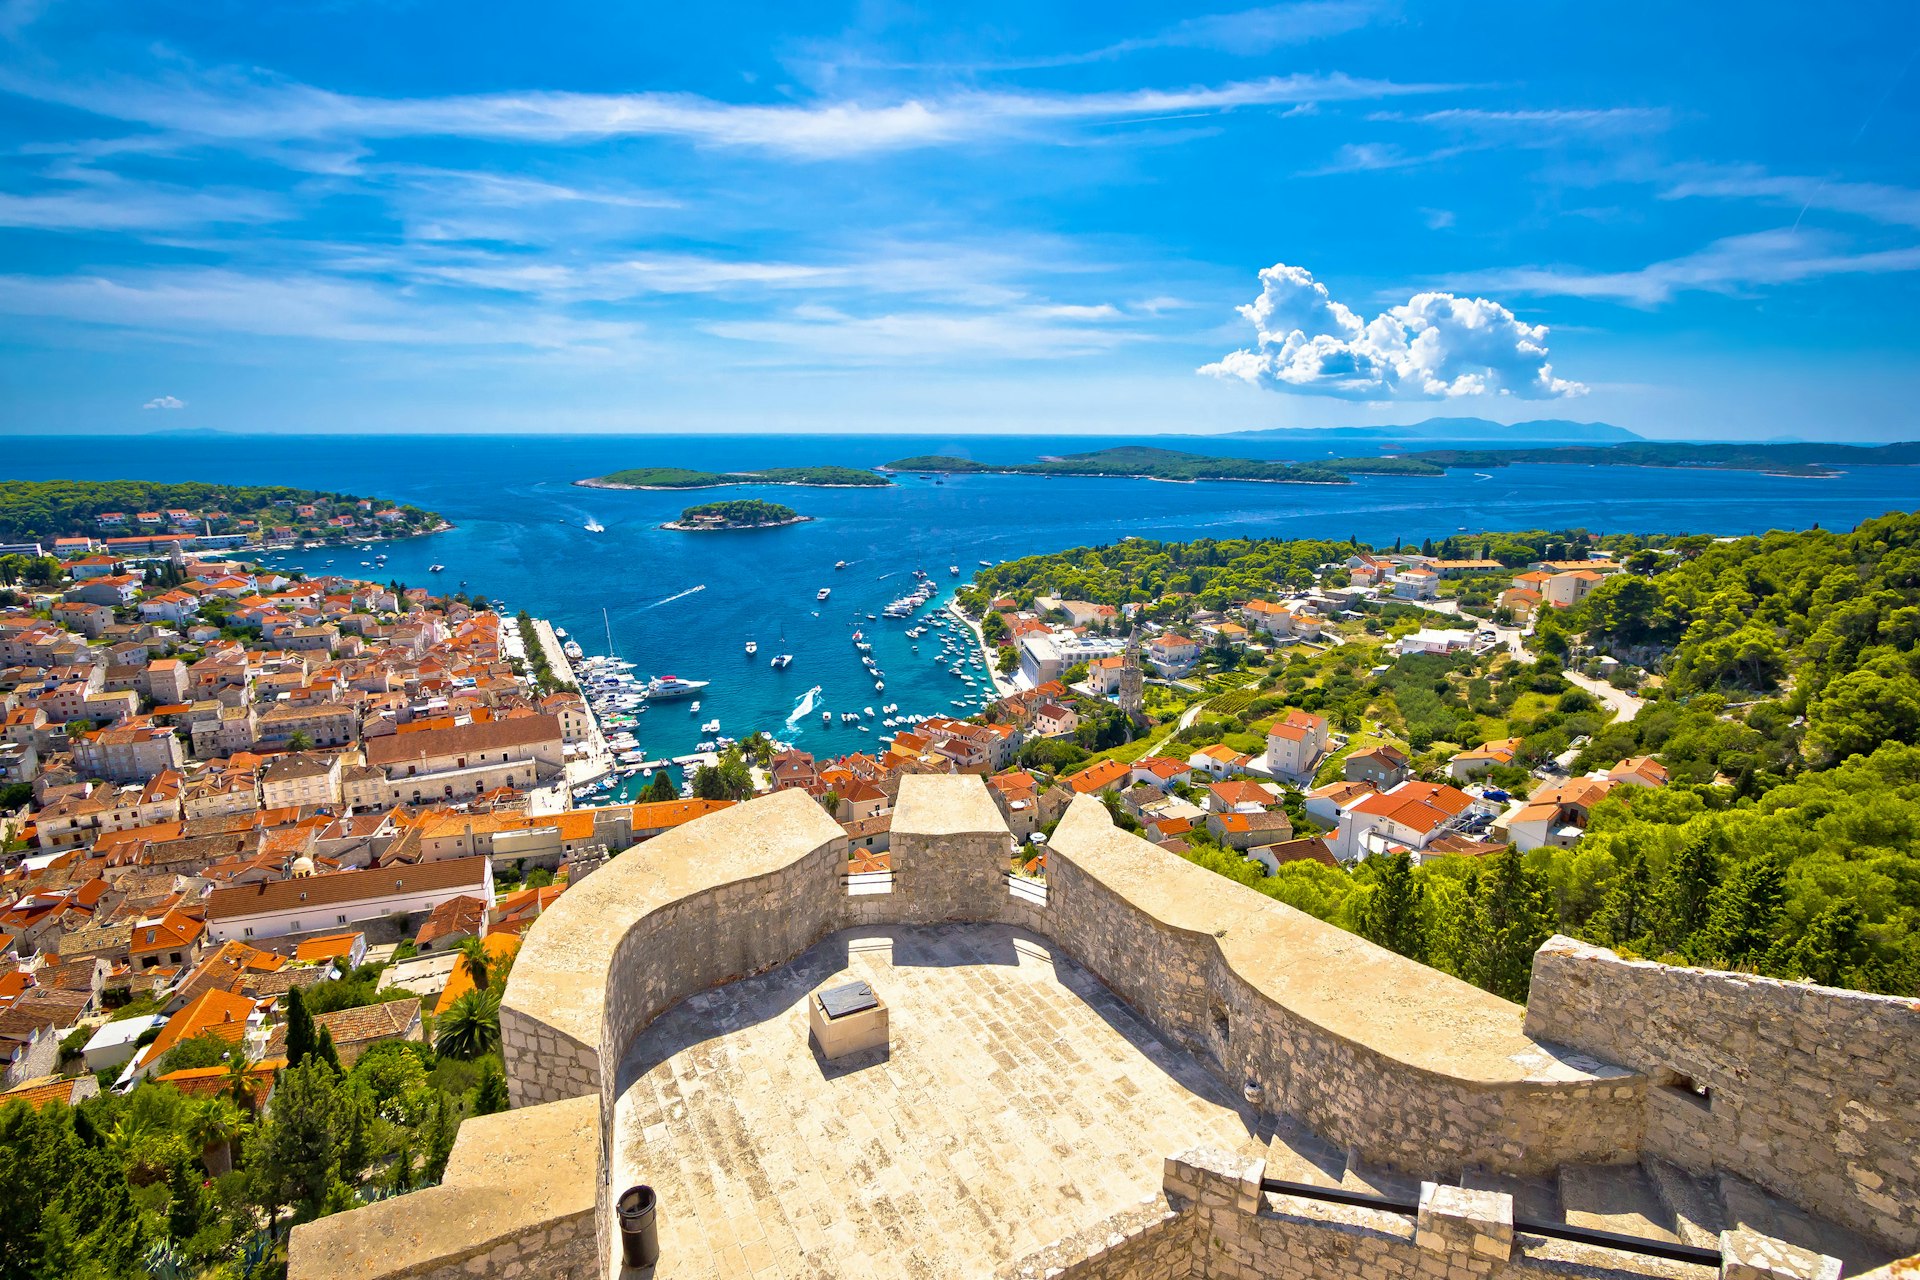 The view out across the Adriatic Sea as seen from Hvar’s citadel